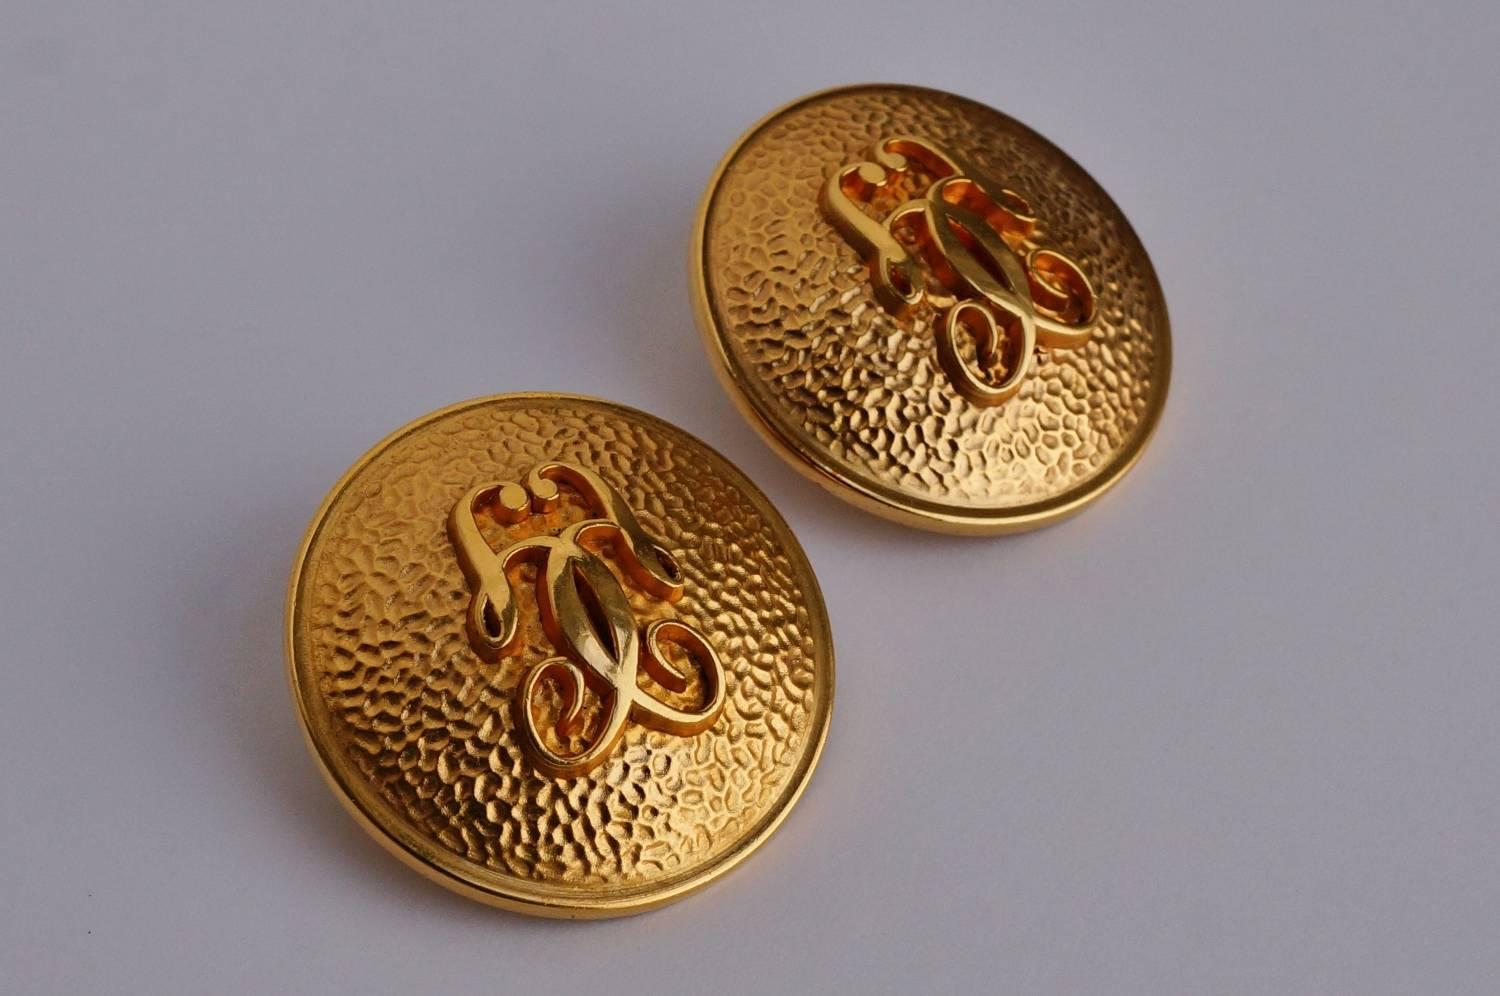 Guerlain earrings gold-plated gilt, circa 1980s, French. With their shield-like form these vintage earrings are characteristic 1980s statement jewelry. The neoclassical design is both playful but also timeless, making these earrings Classic and easy